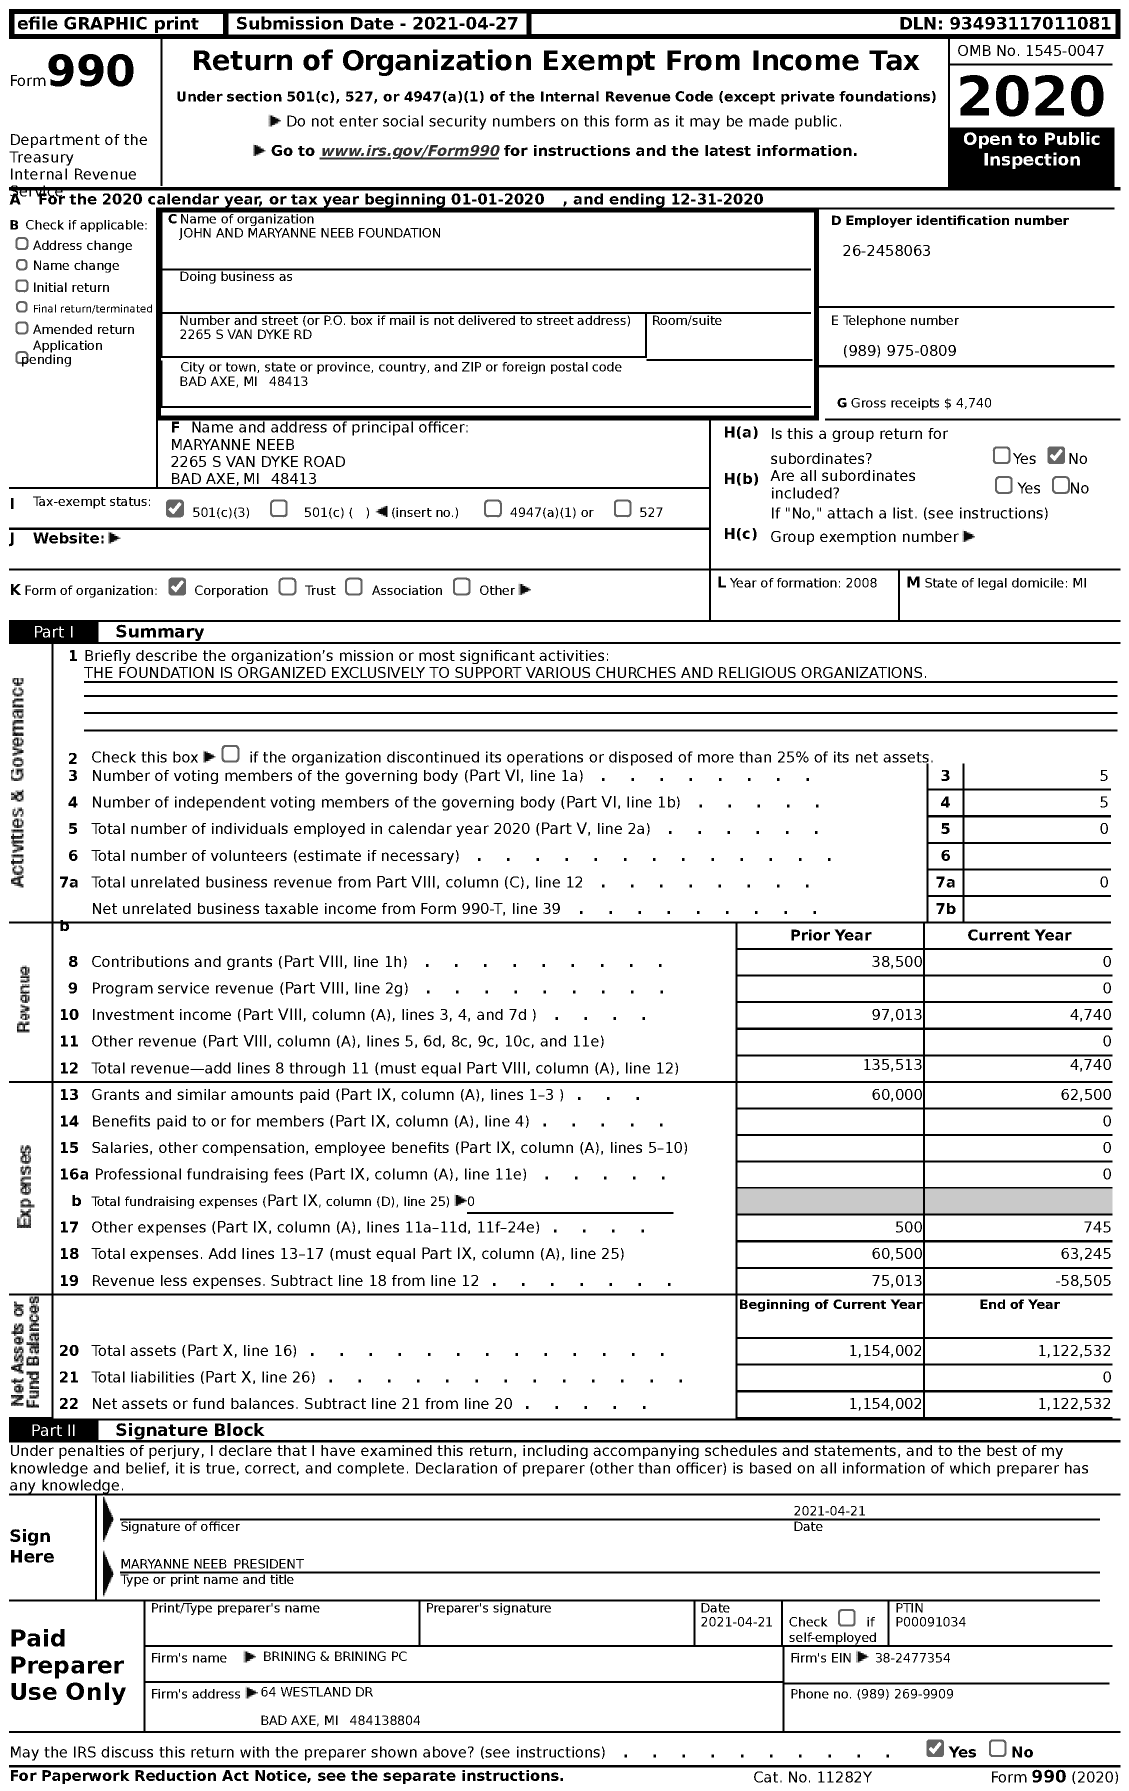 Image of first page of 2020 Form 990 for John and Maryanne Neeb Foundation